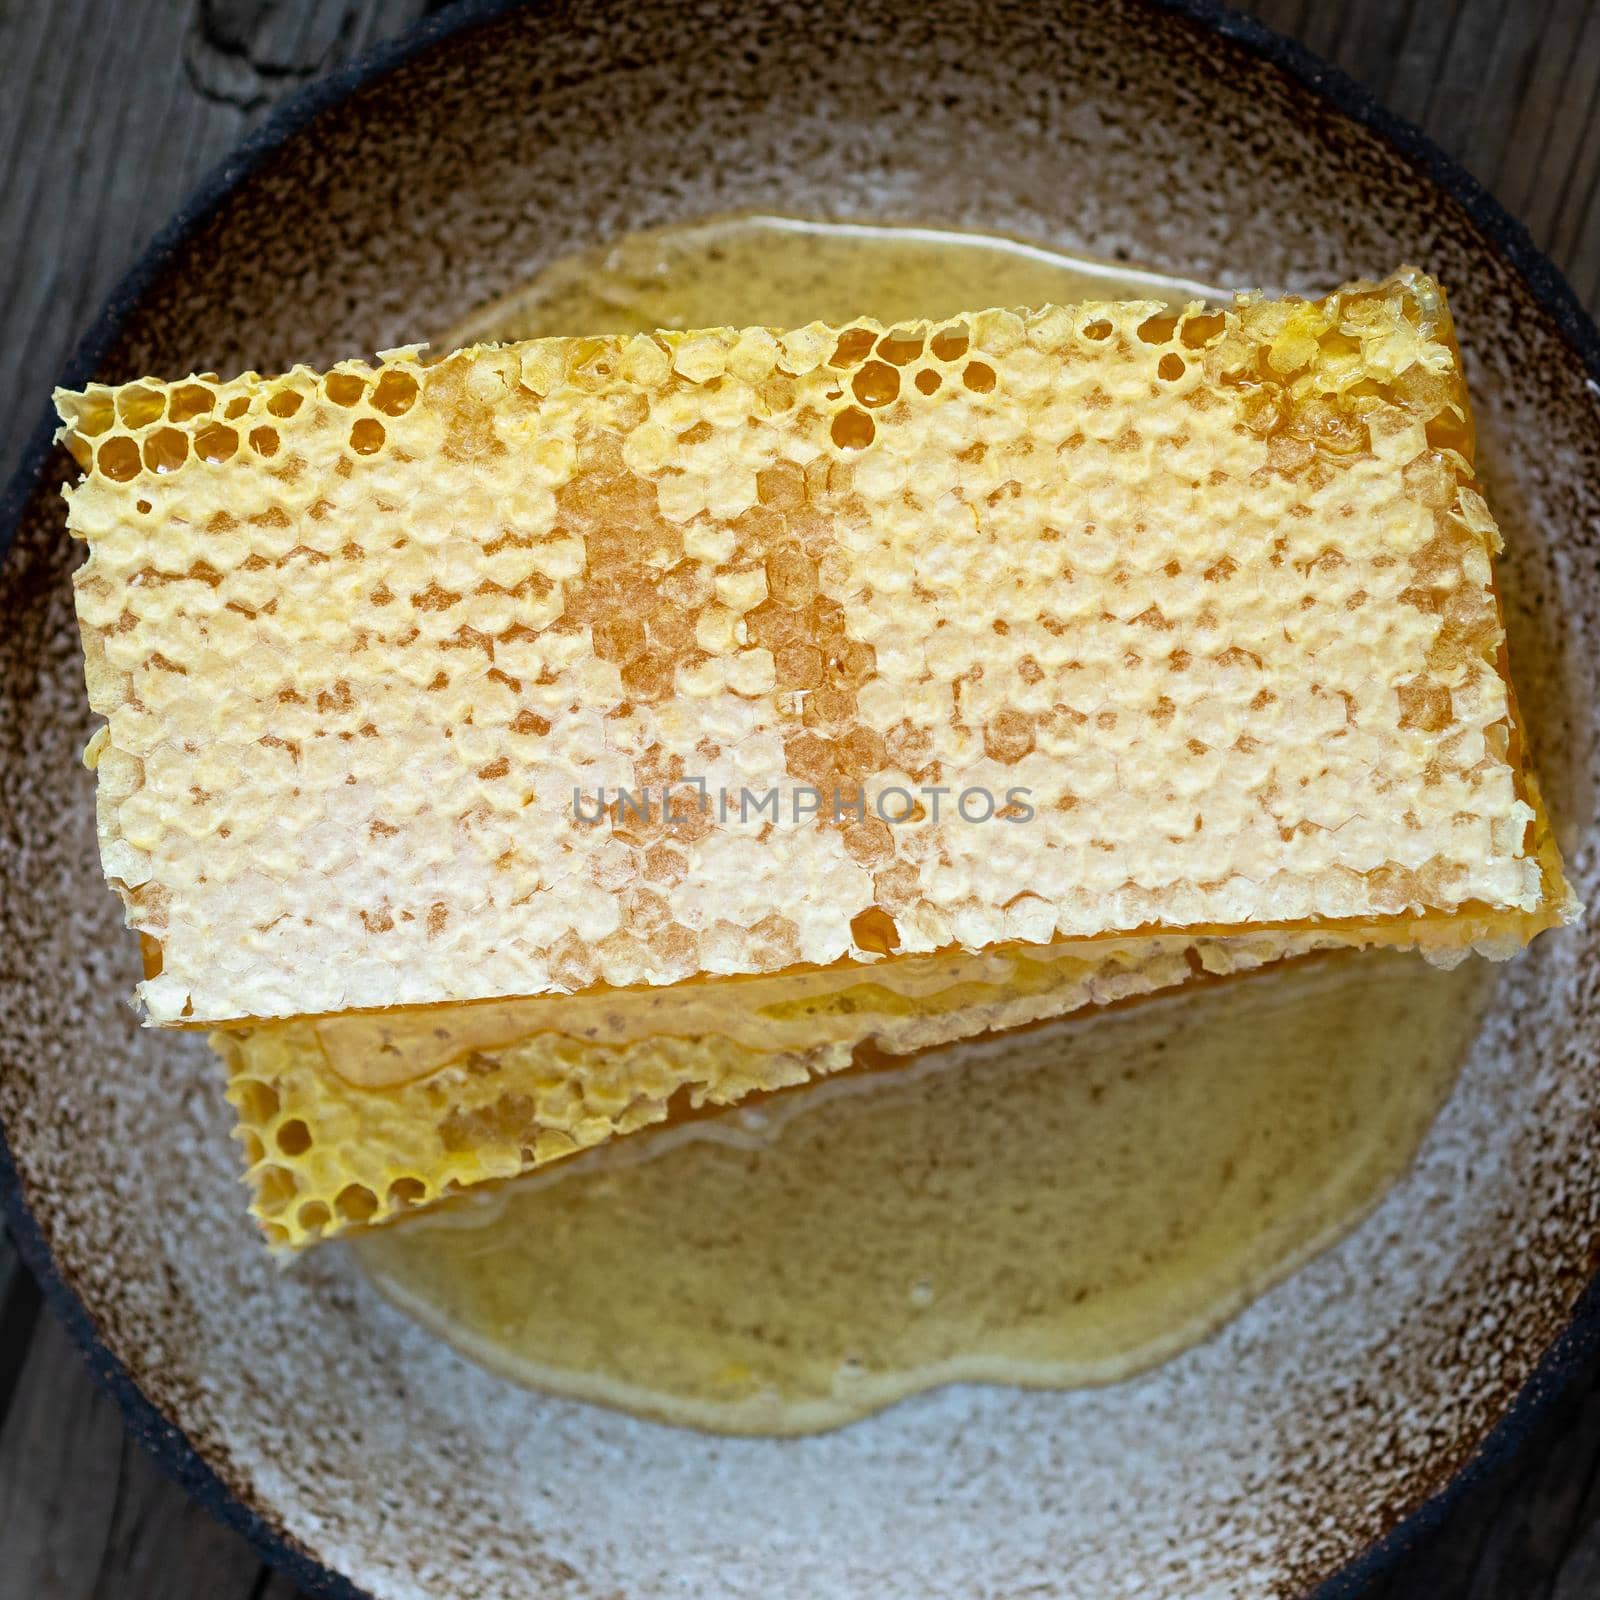 honey in honeycomb, close-up, on a ceramic plate, on a wooden rustic table, top view.